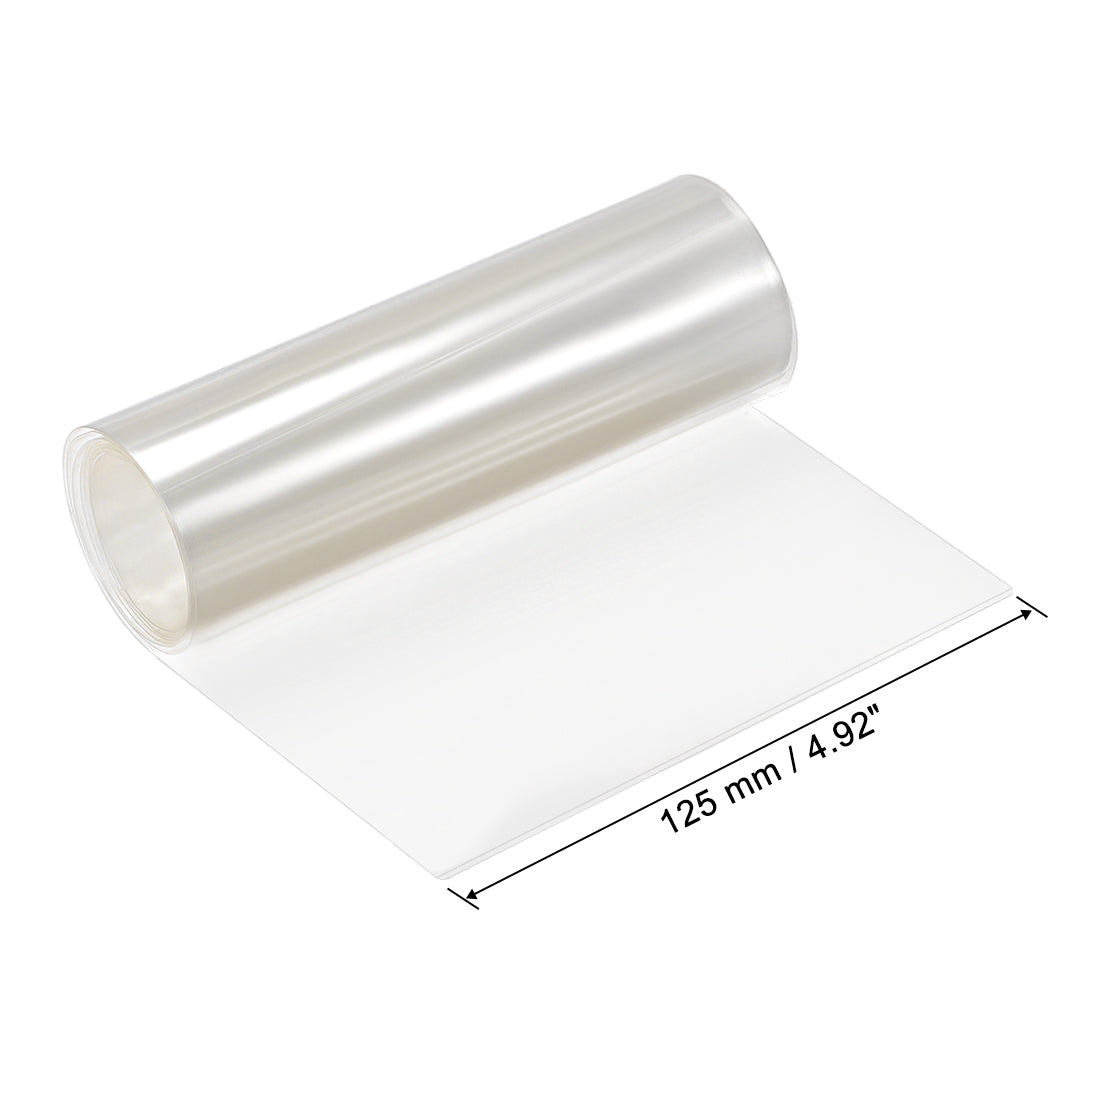 Uxcell Uxcell PVC Heat Shrink Tube 125mm Flat Width Wrap for Dual Layer 18650 1 Meter Clear